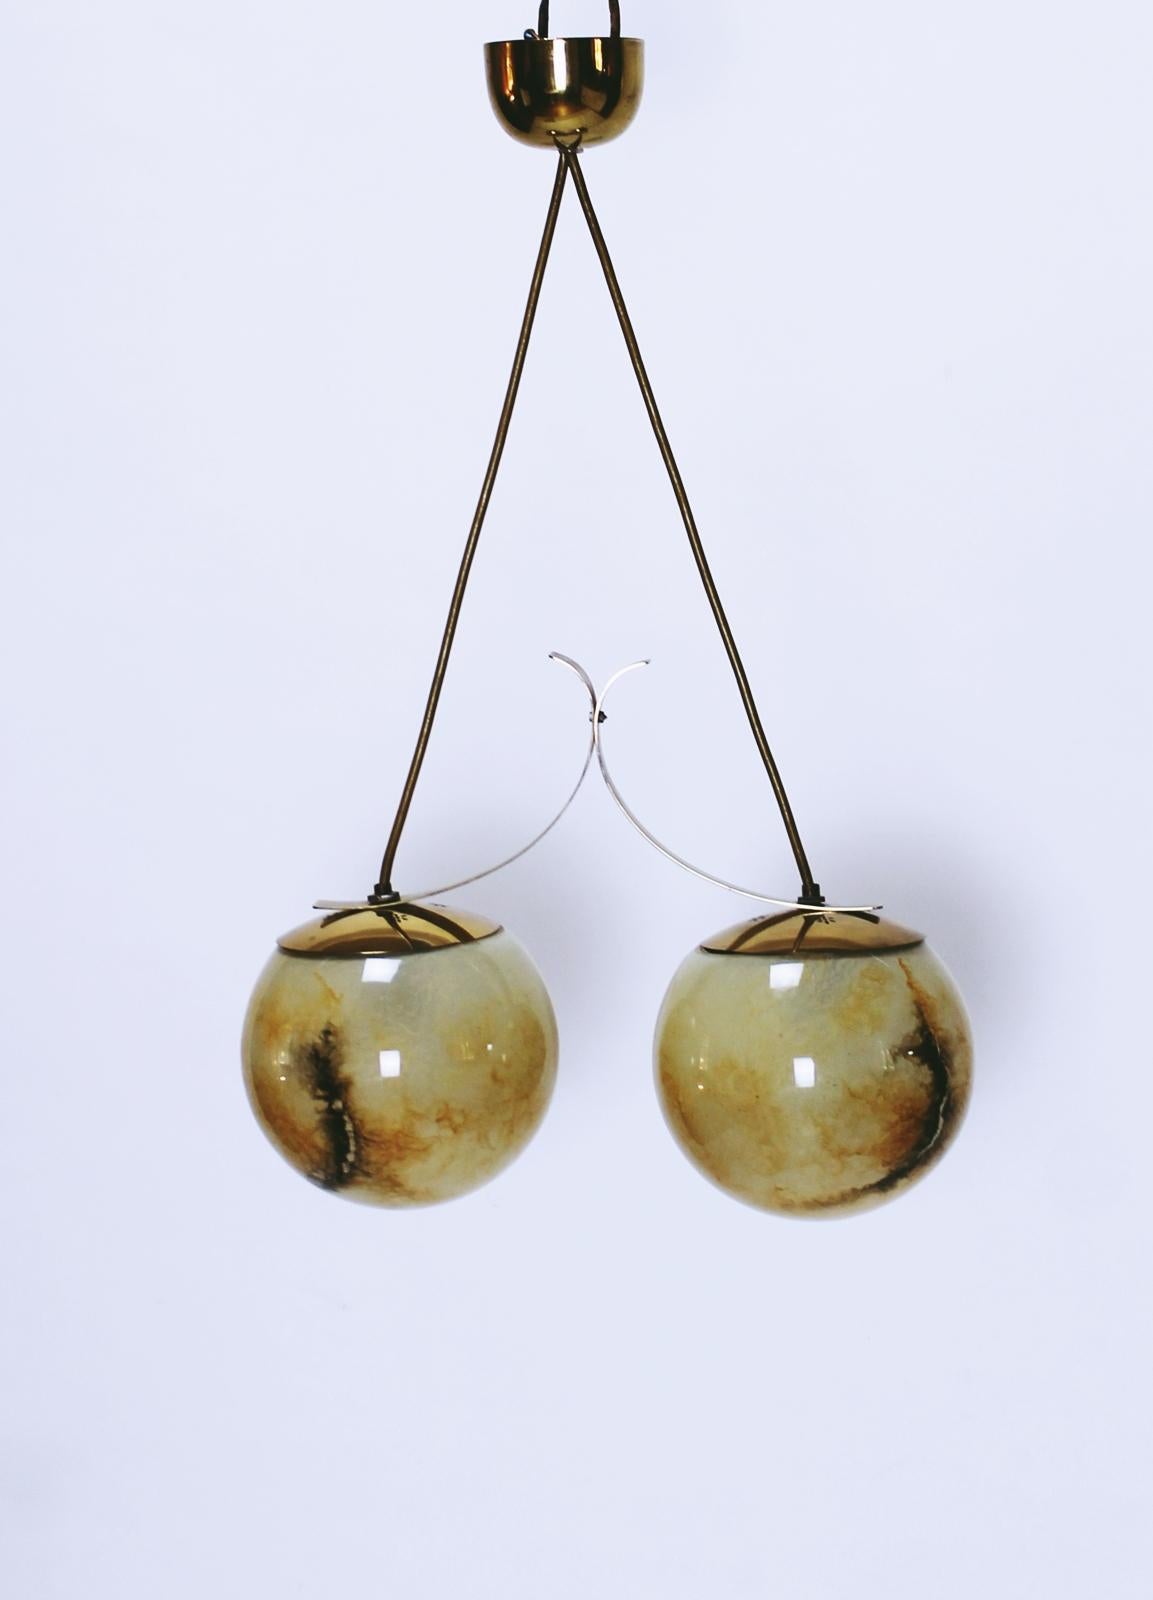 Vintage Austrian origin pendant light, manufactured in early 1940s. A beautiful piece with a marbling effect ball  glass lampshade. In very good condition with nice patina on the brass.
High quality of materials.

Dimensions:
Diameter 21

Total